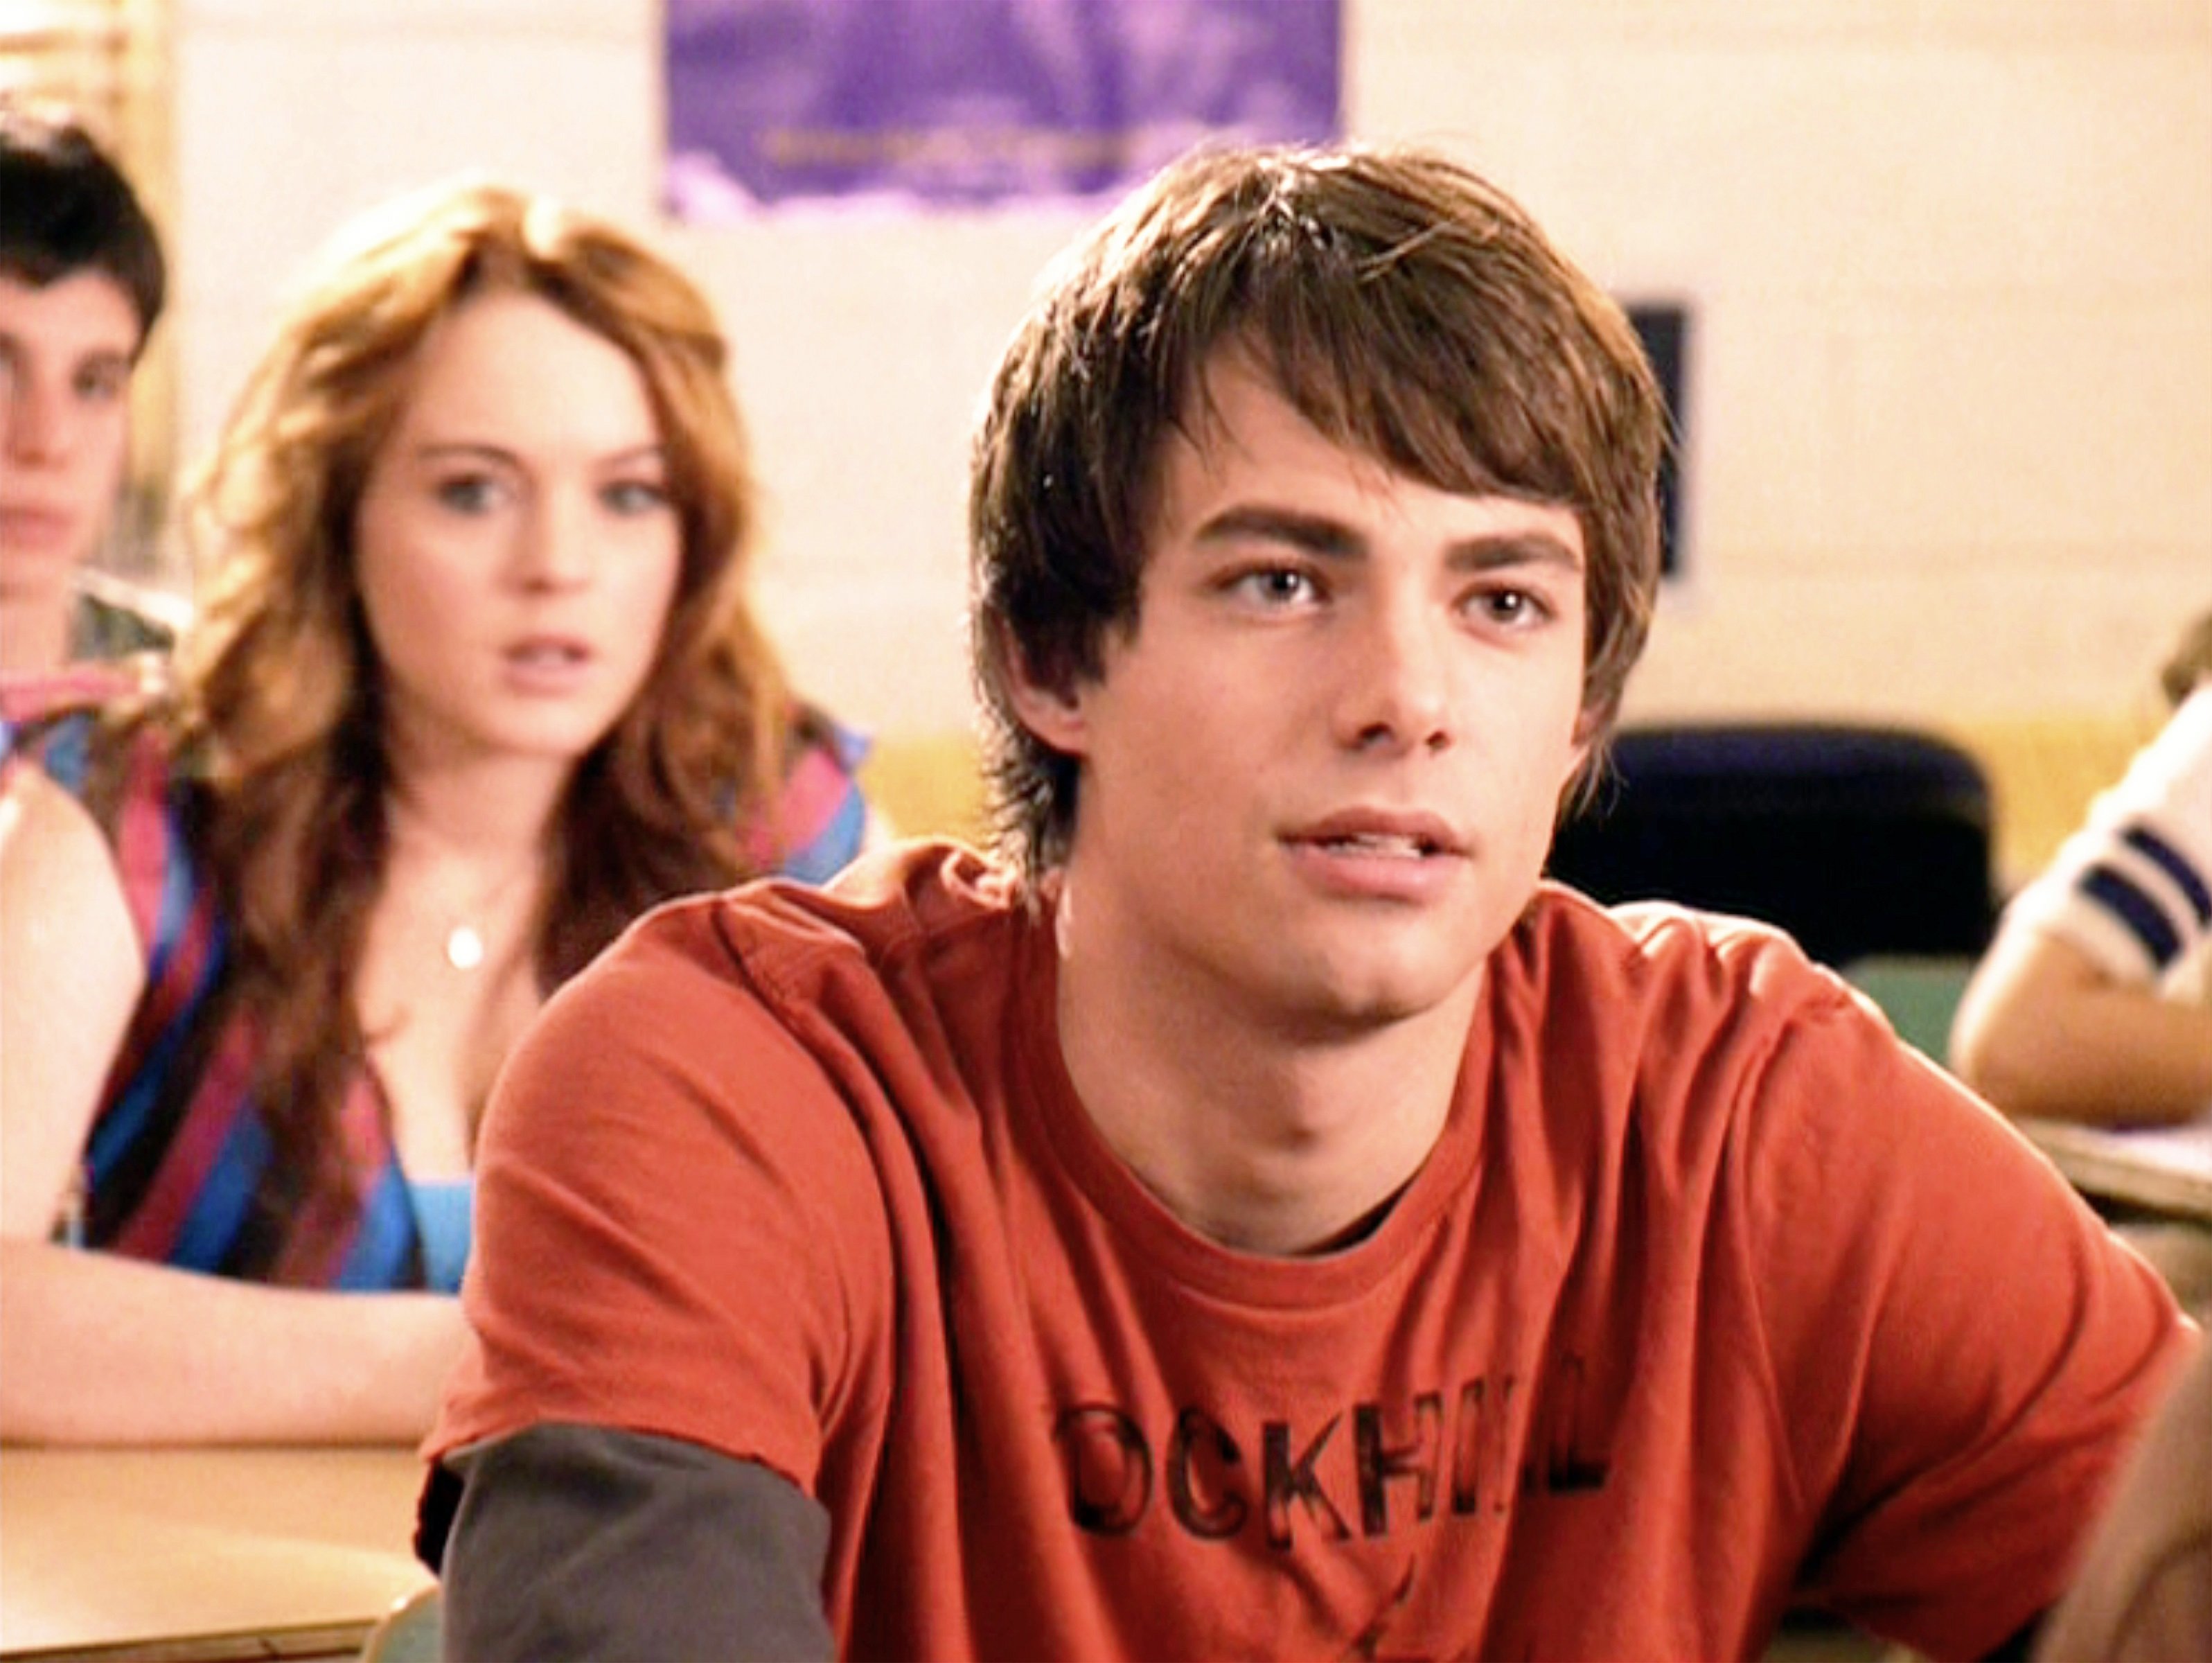 Mean Girls October Third moment with Lindsay Lohan and Jonathan Bennett